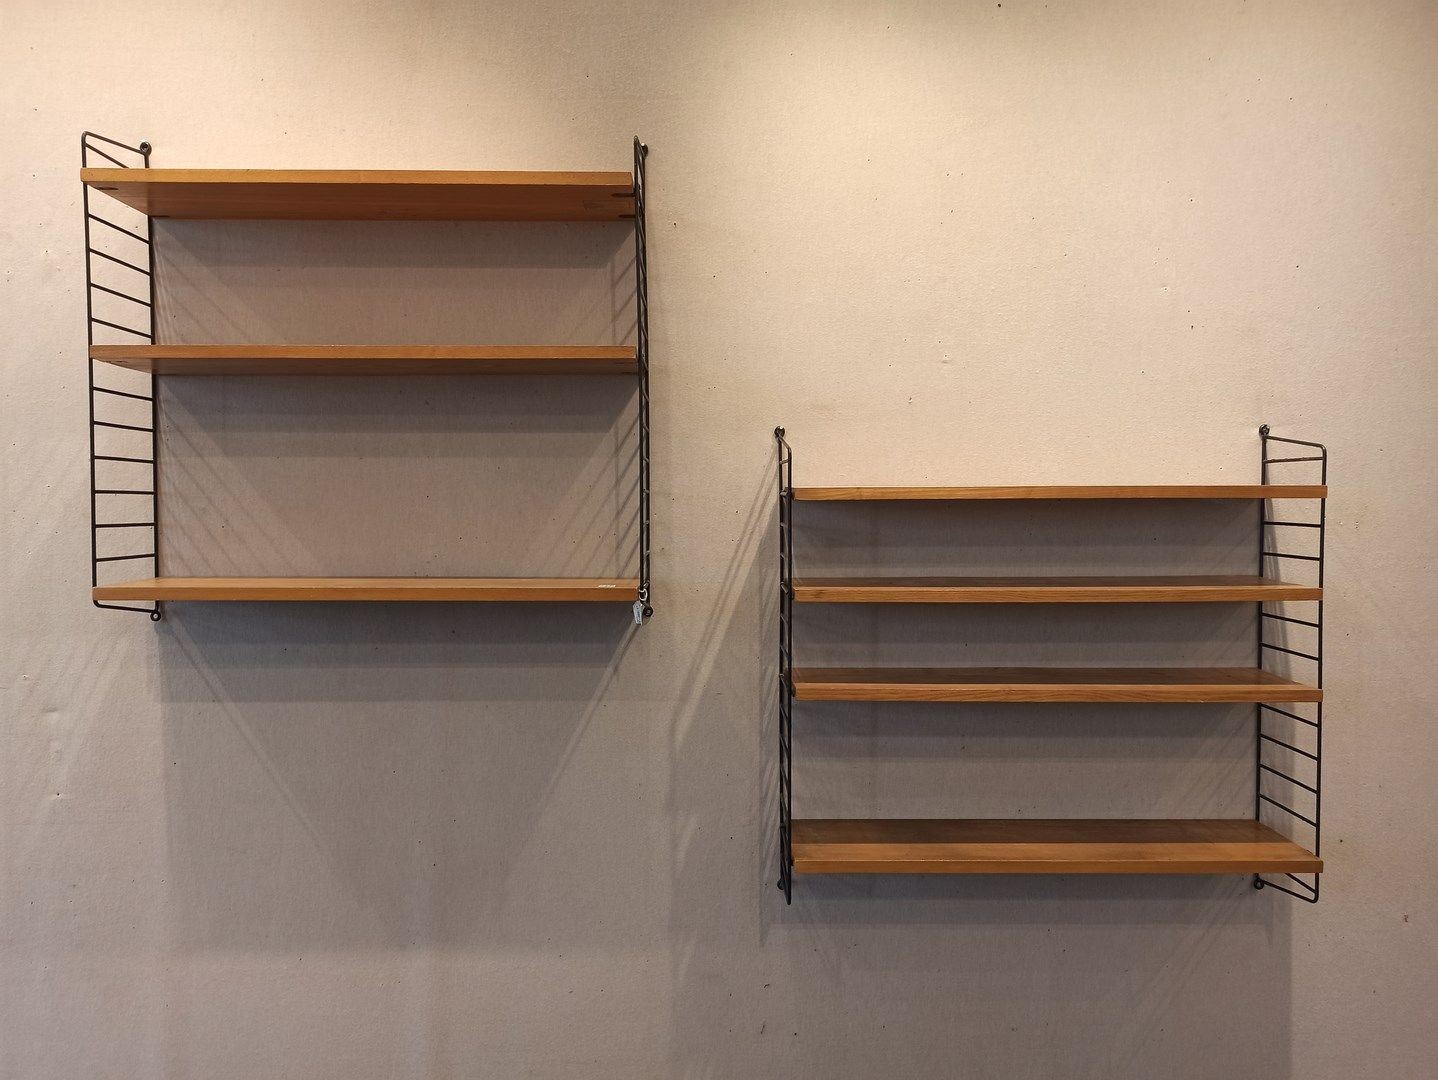 Null Nisse STRINNING (1917-2006)

Pair of wall shelves "String" model with black&hellip;